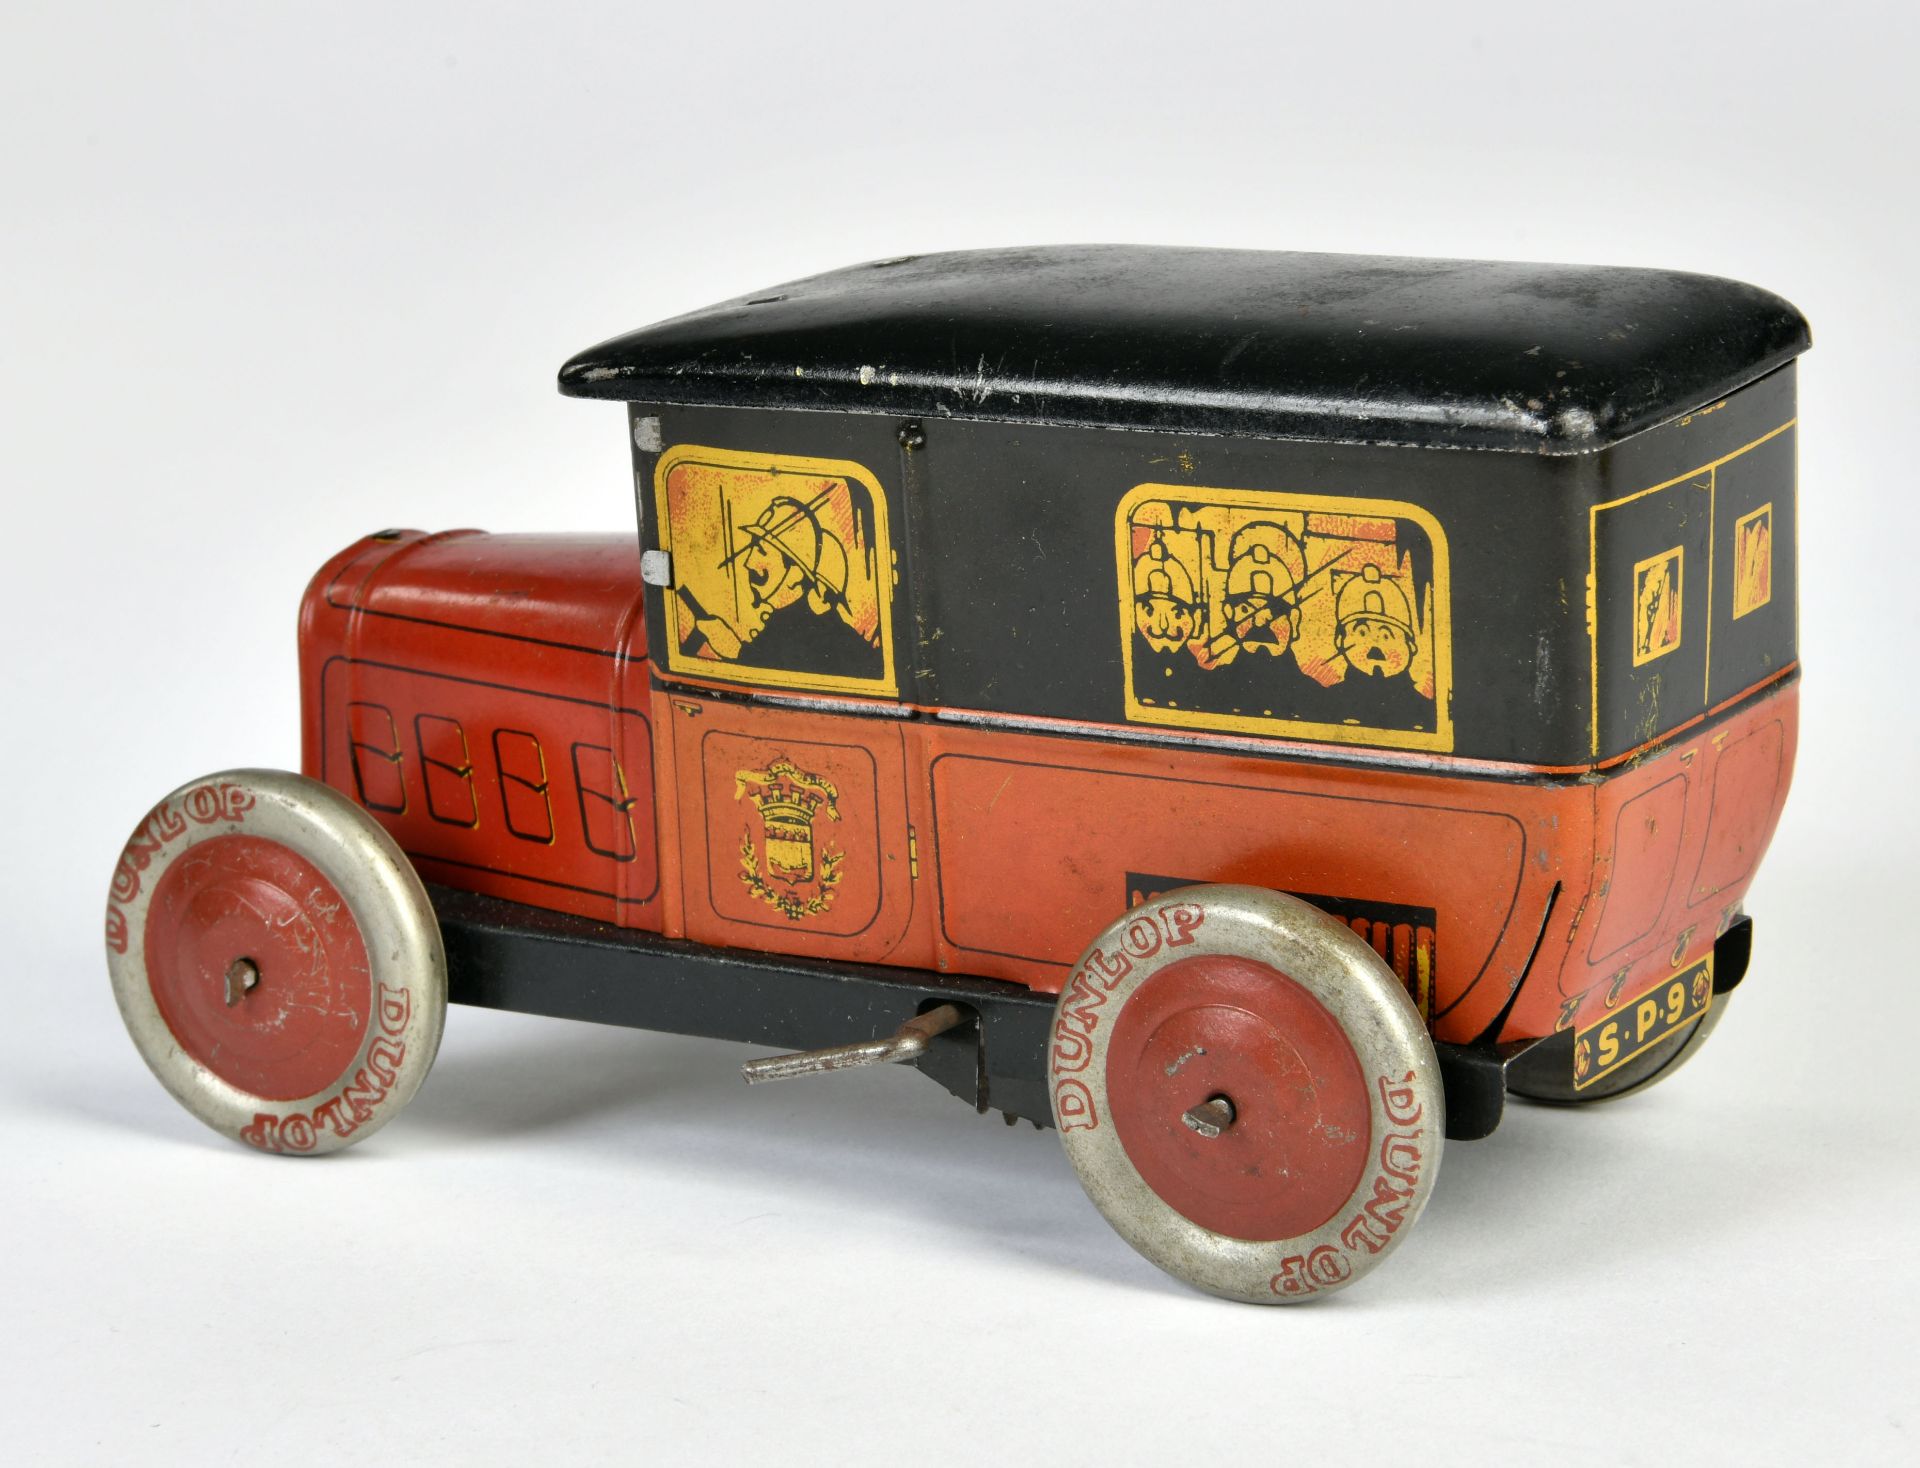 Biscuit can as fire engine, France pw, 17 cm, tin, cw ok, min. paint d., C 2 - Image 2 of 2